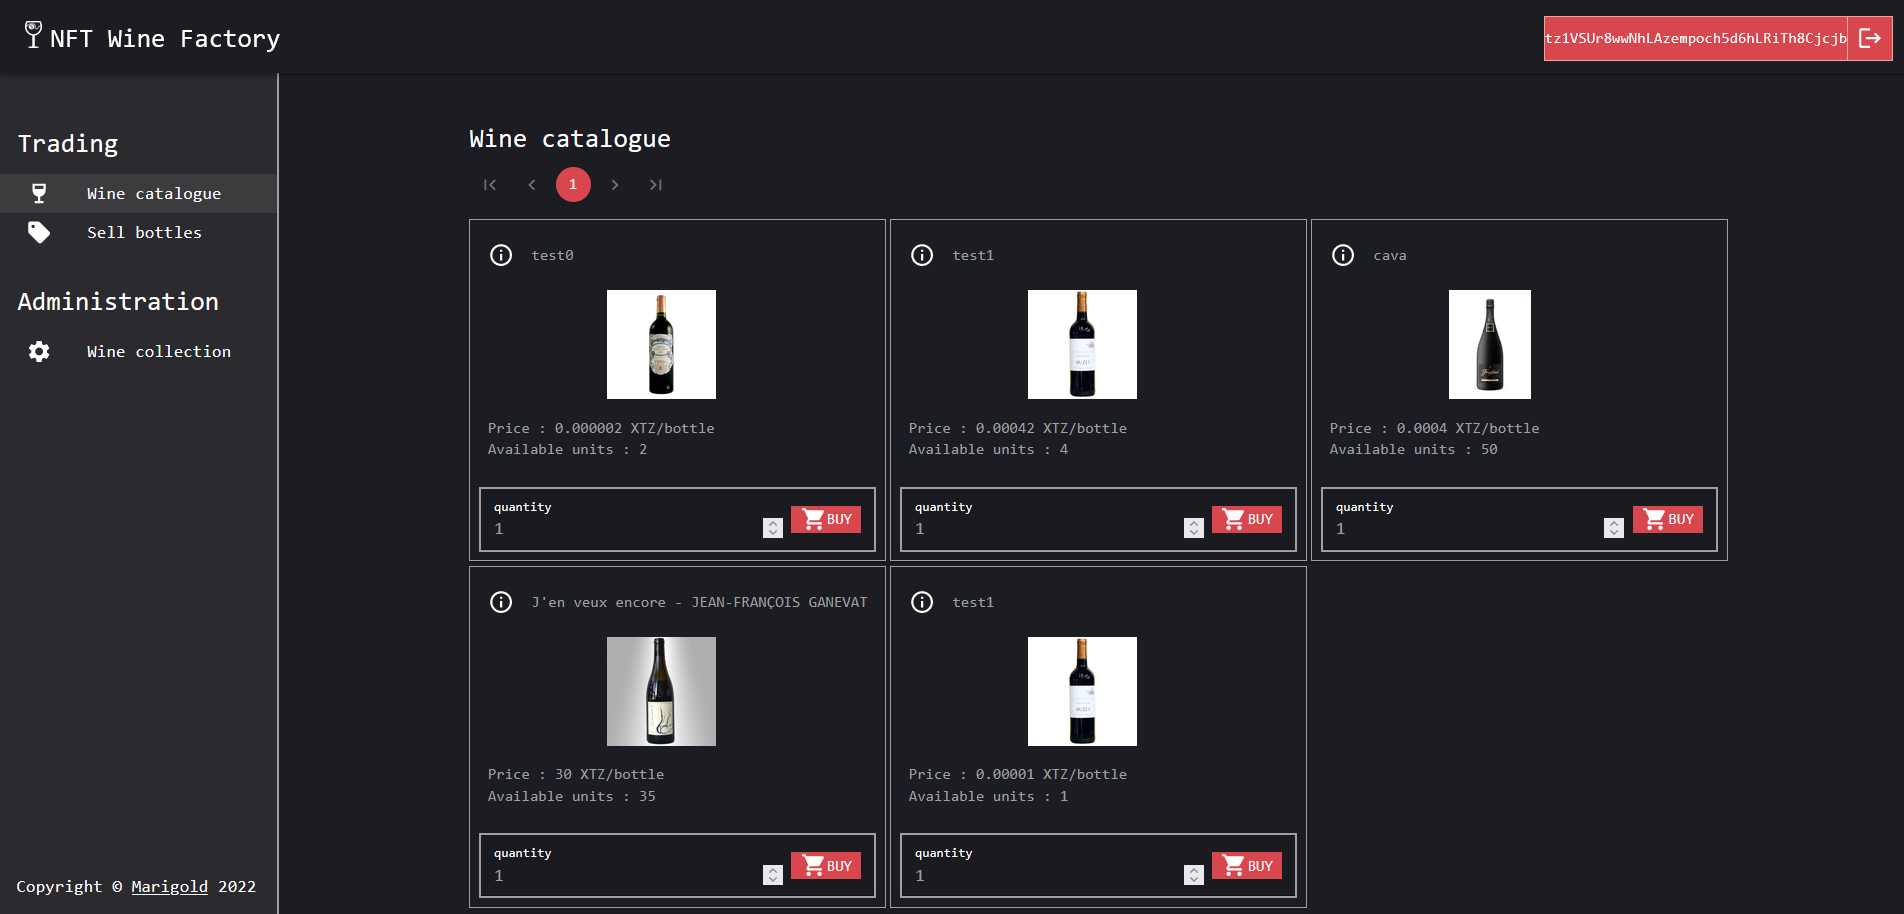 The complete application, showing wine bottles for sale